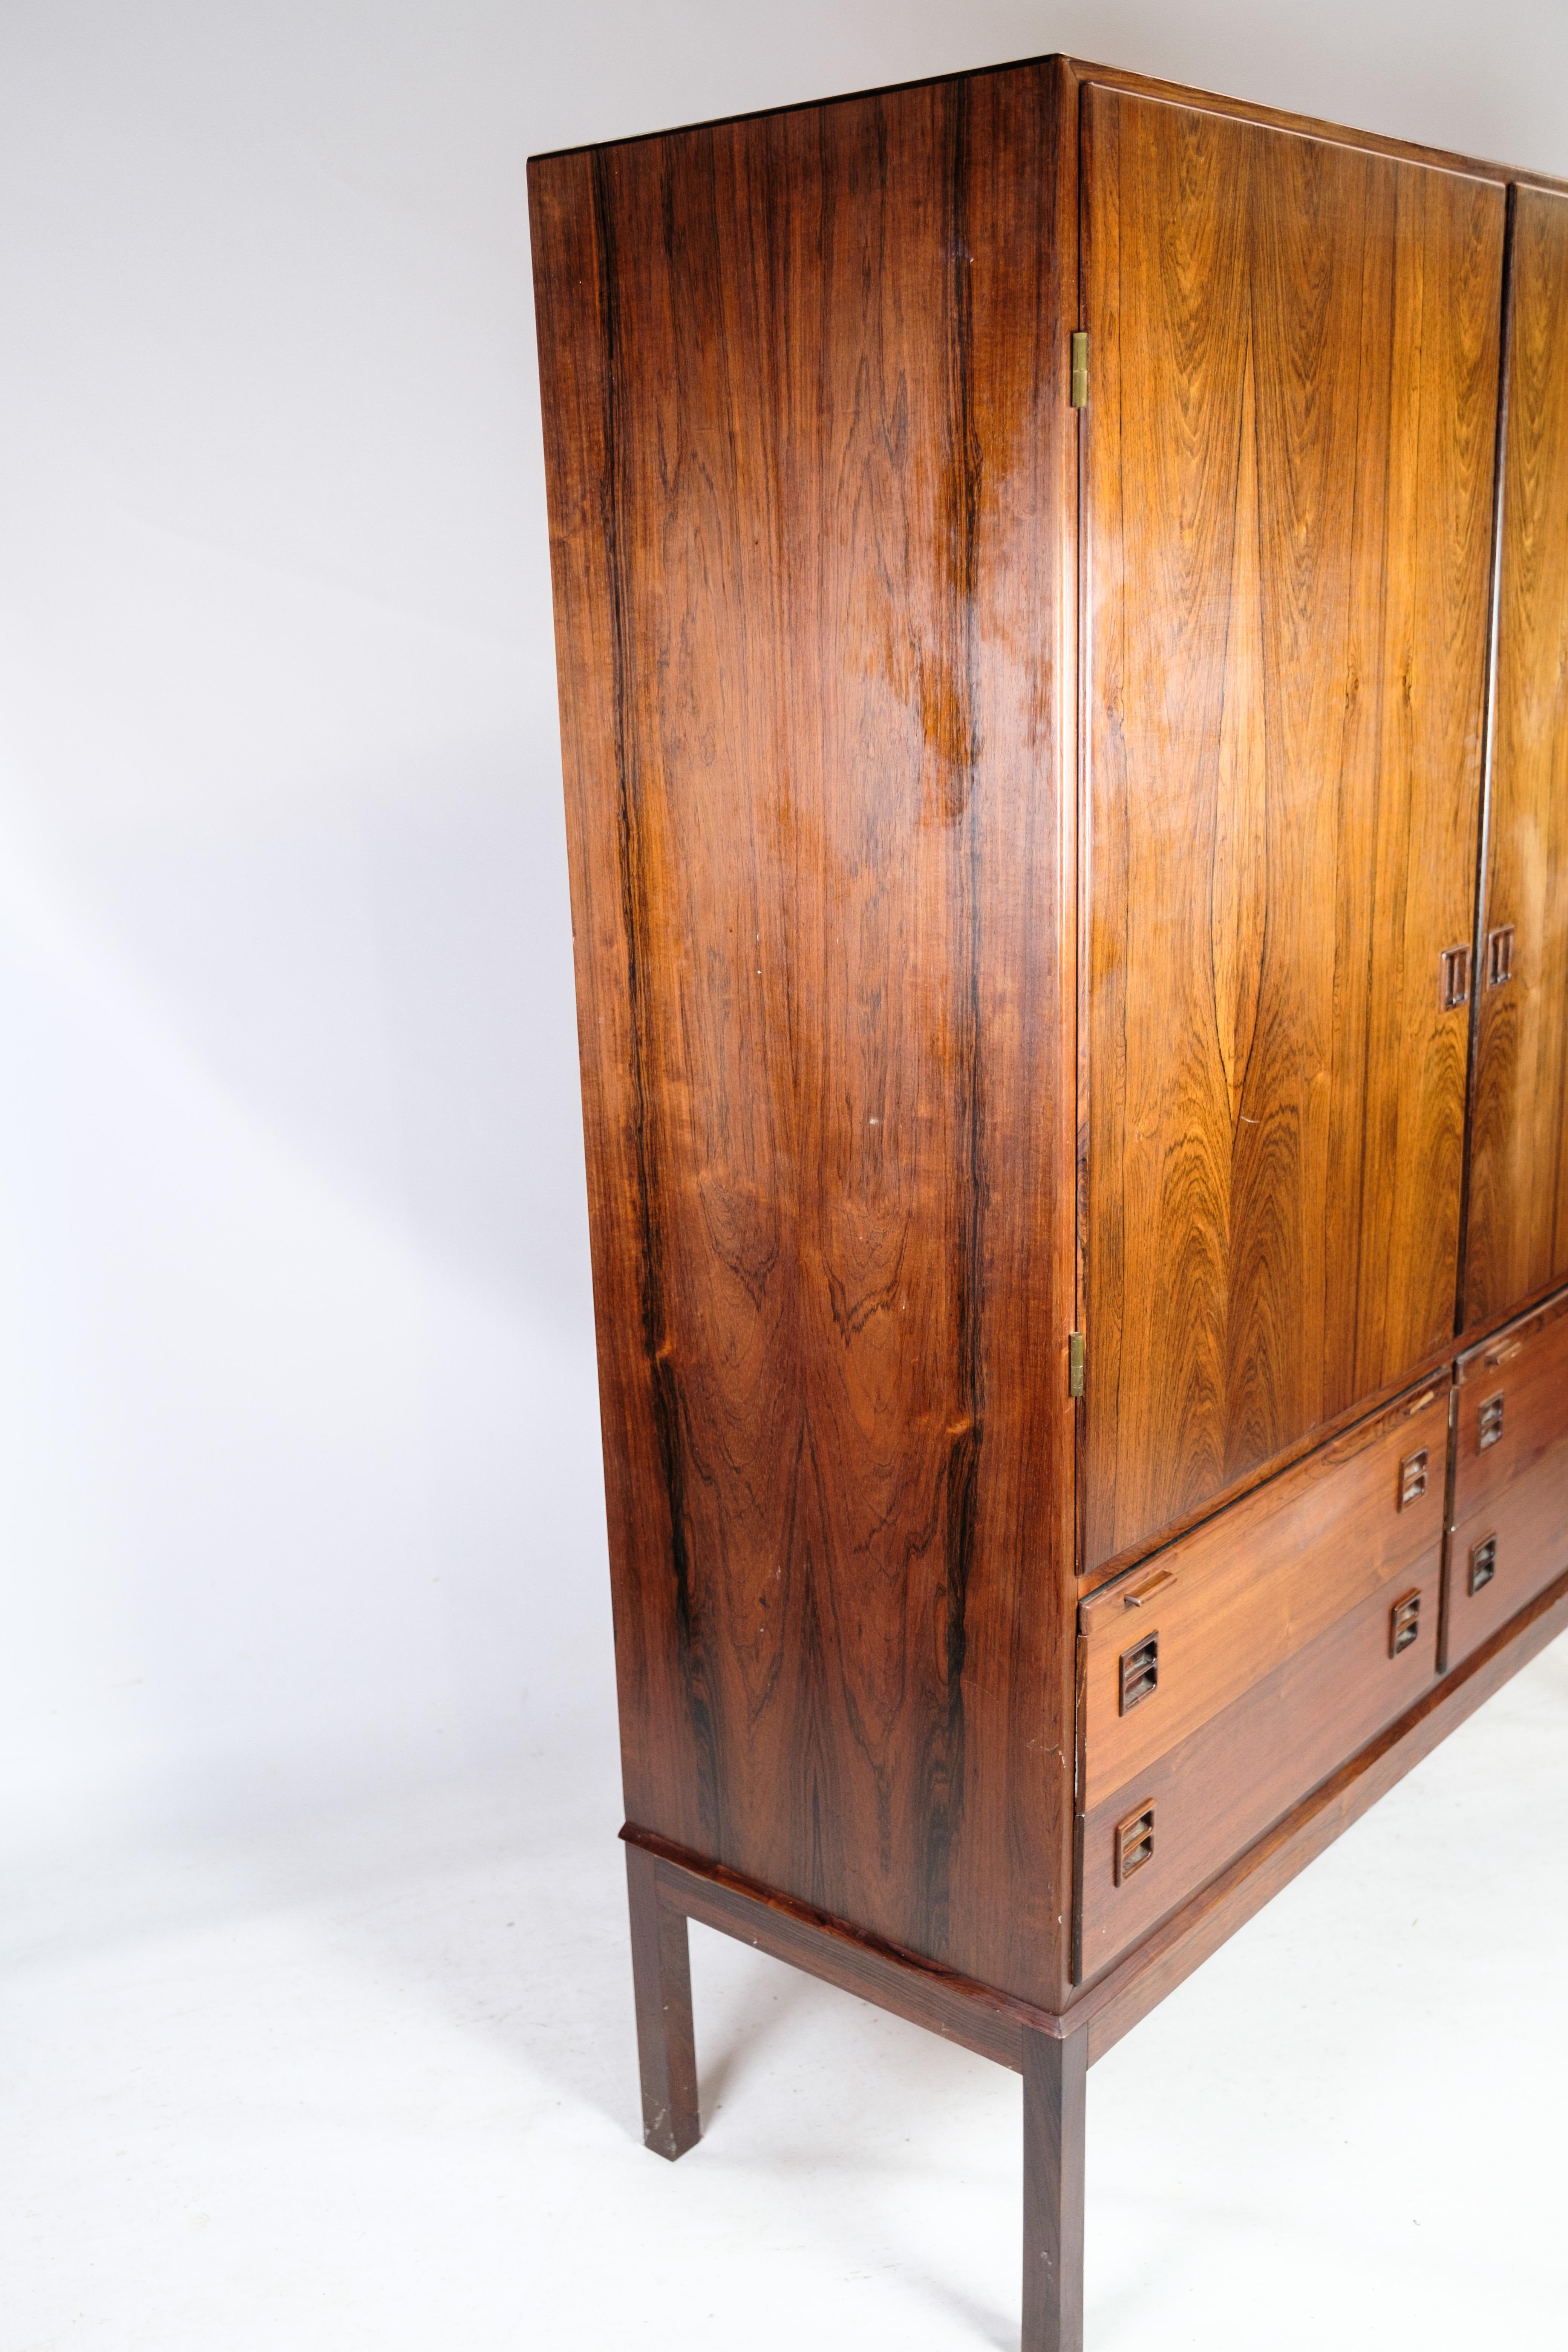 Cabinet By Johannes Andersen For Bernhard Pedersen & Son From 1964s In Good Condition For Sale In Lejre, DK